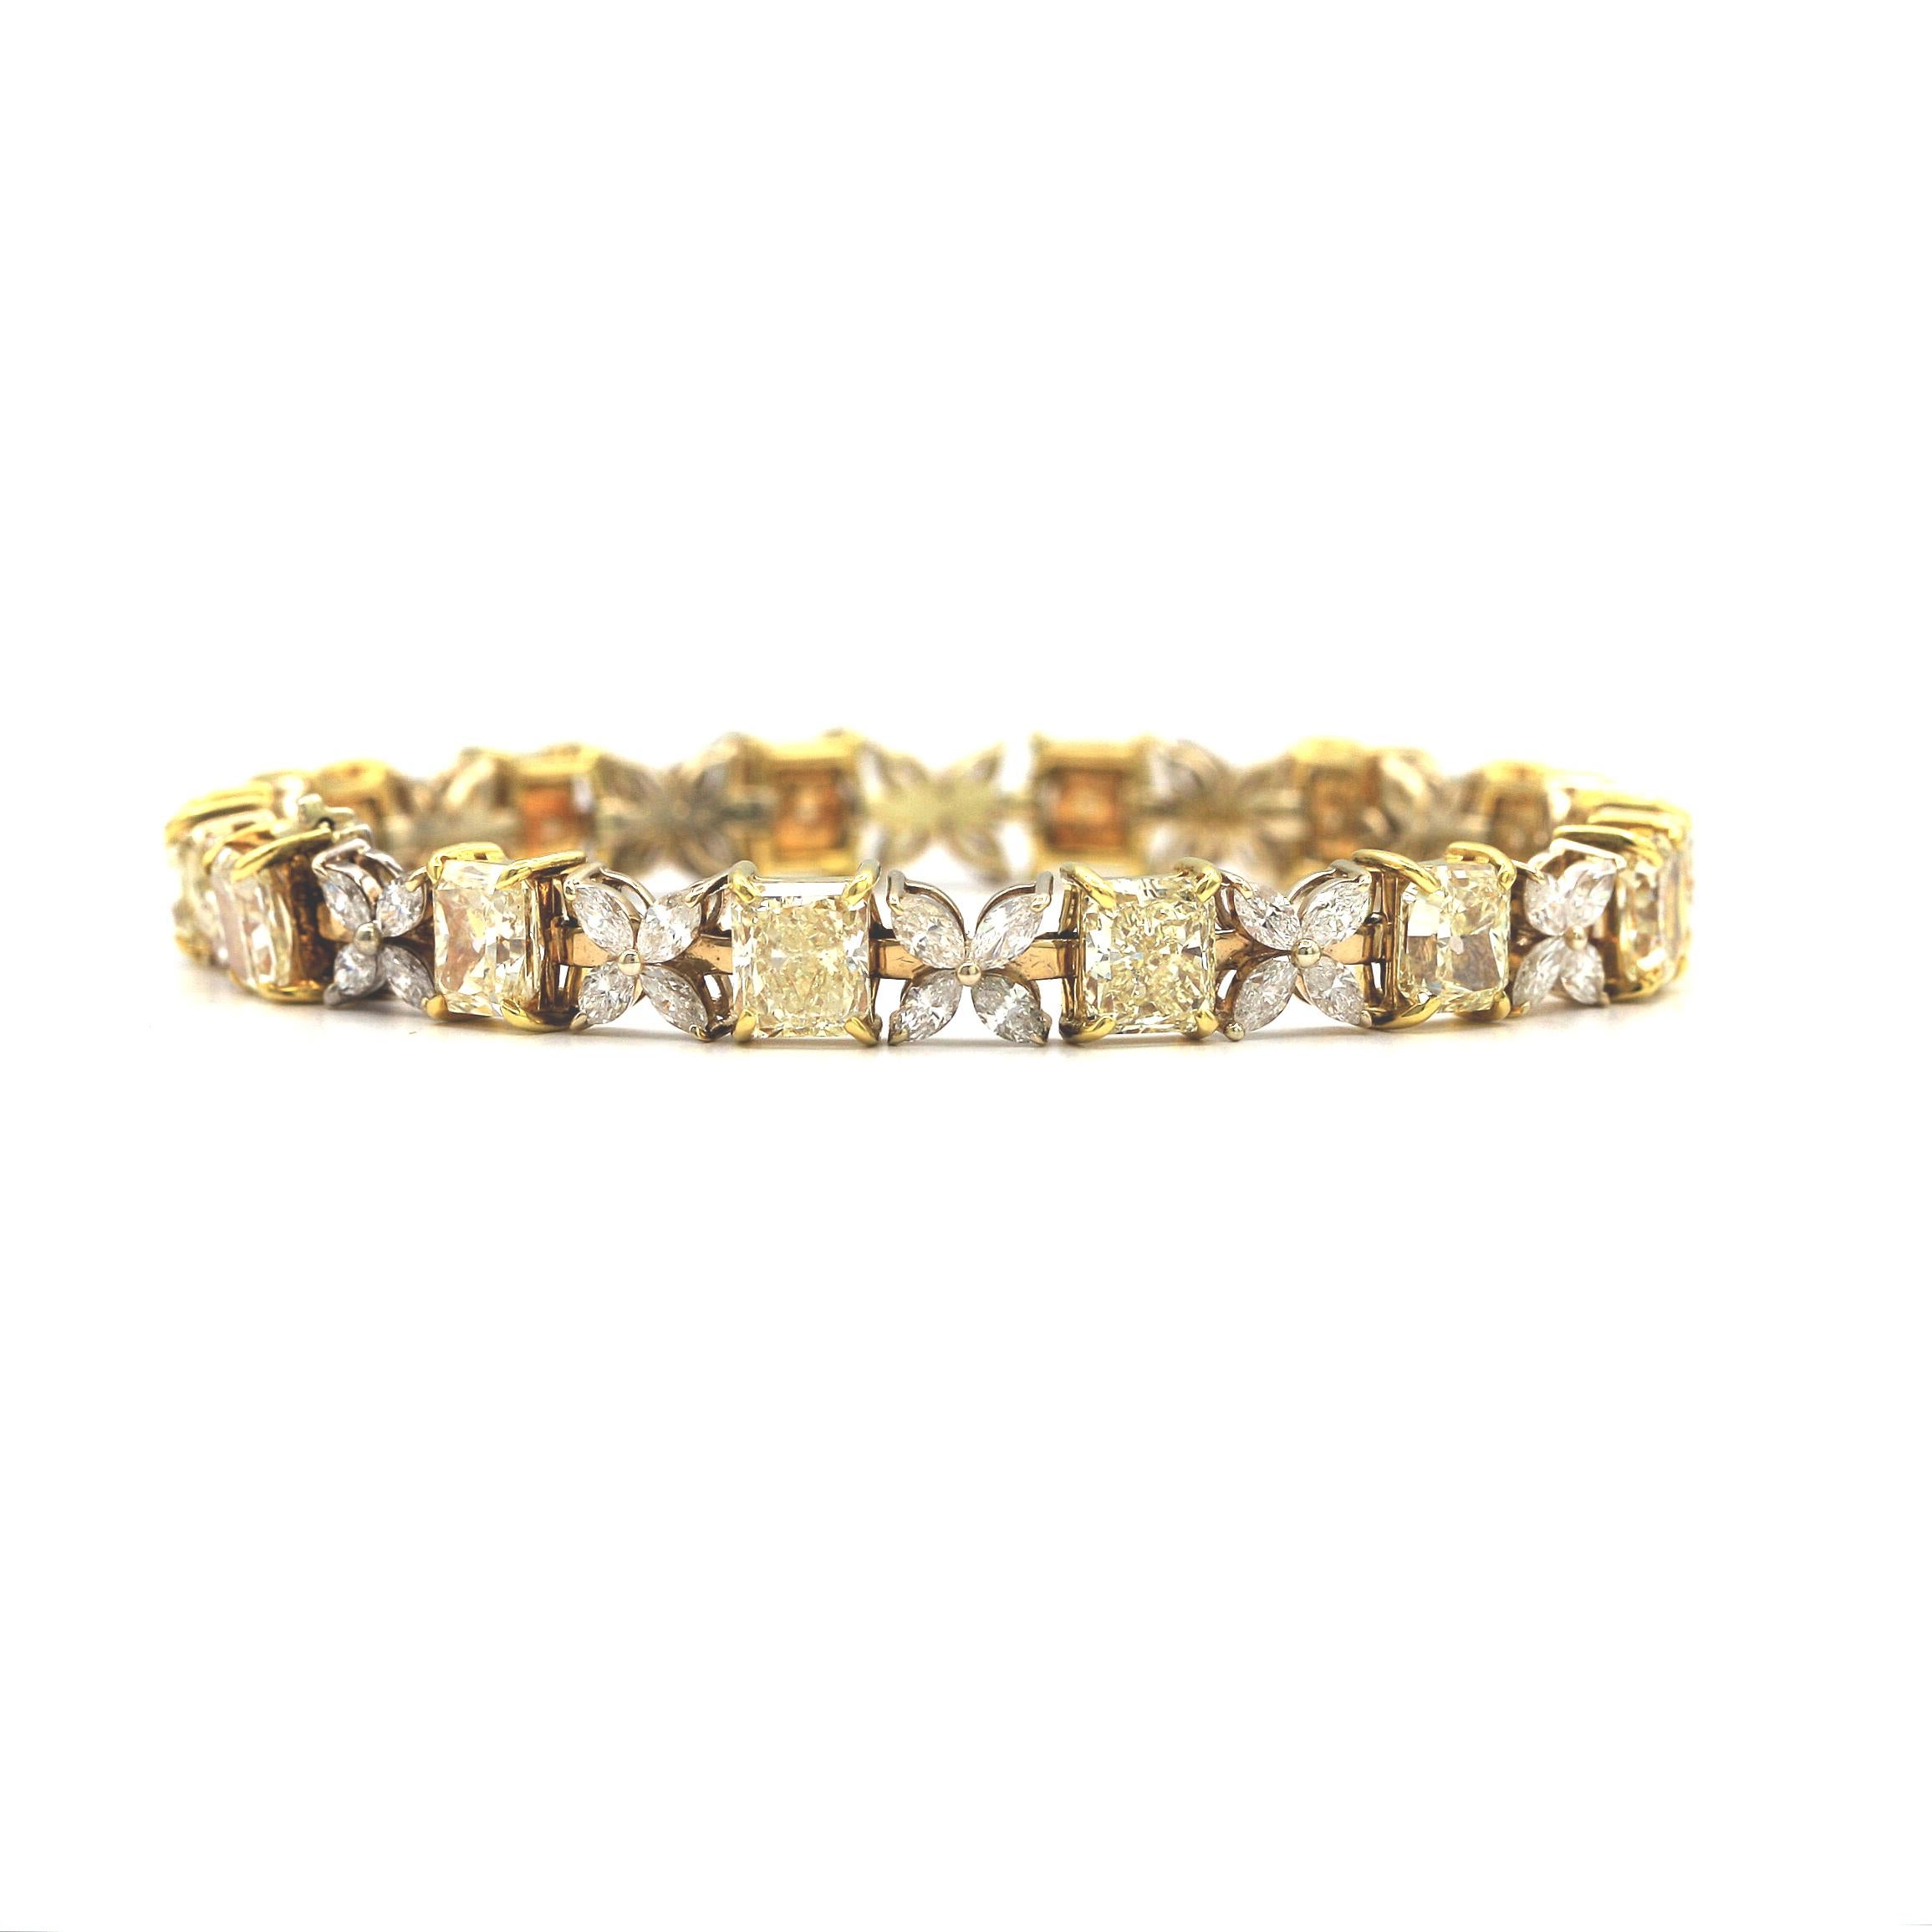 13.99 Carat Radiant Fancy Yellow and White Diamonds Bracelet in 18 Karat In New Condition For Sale In Los Angeles, CA